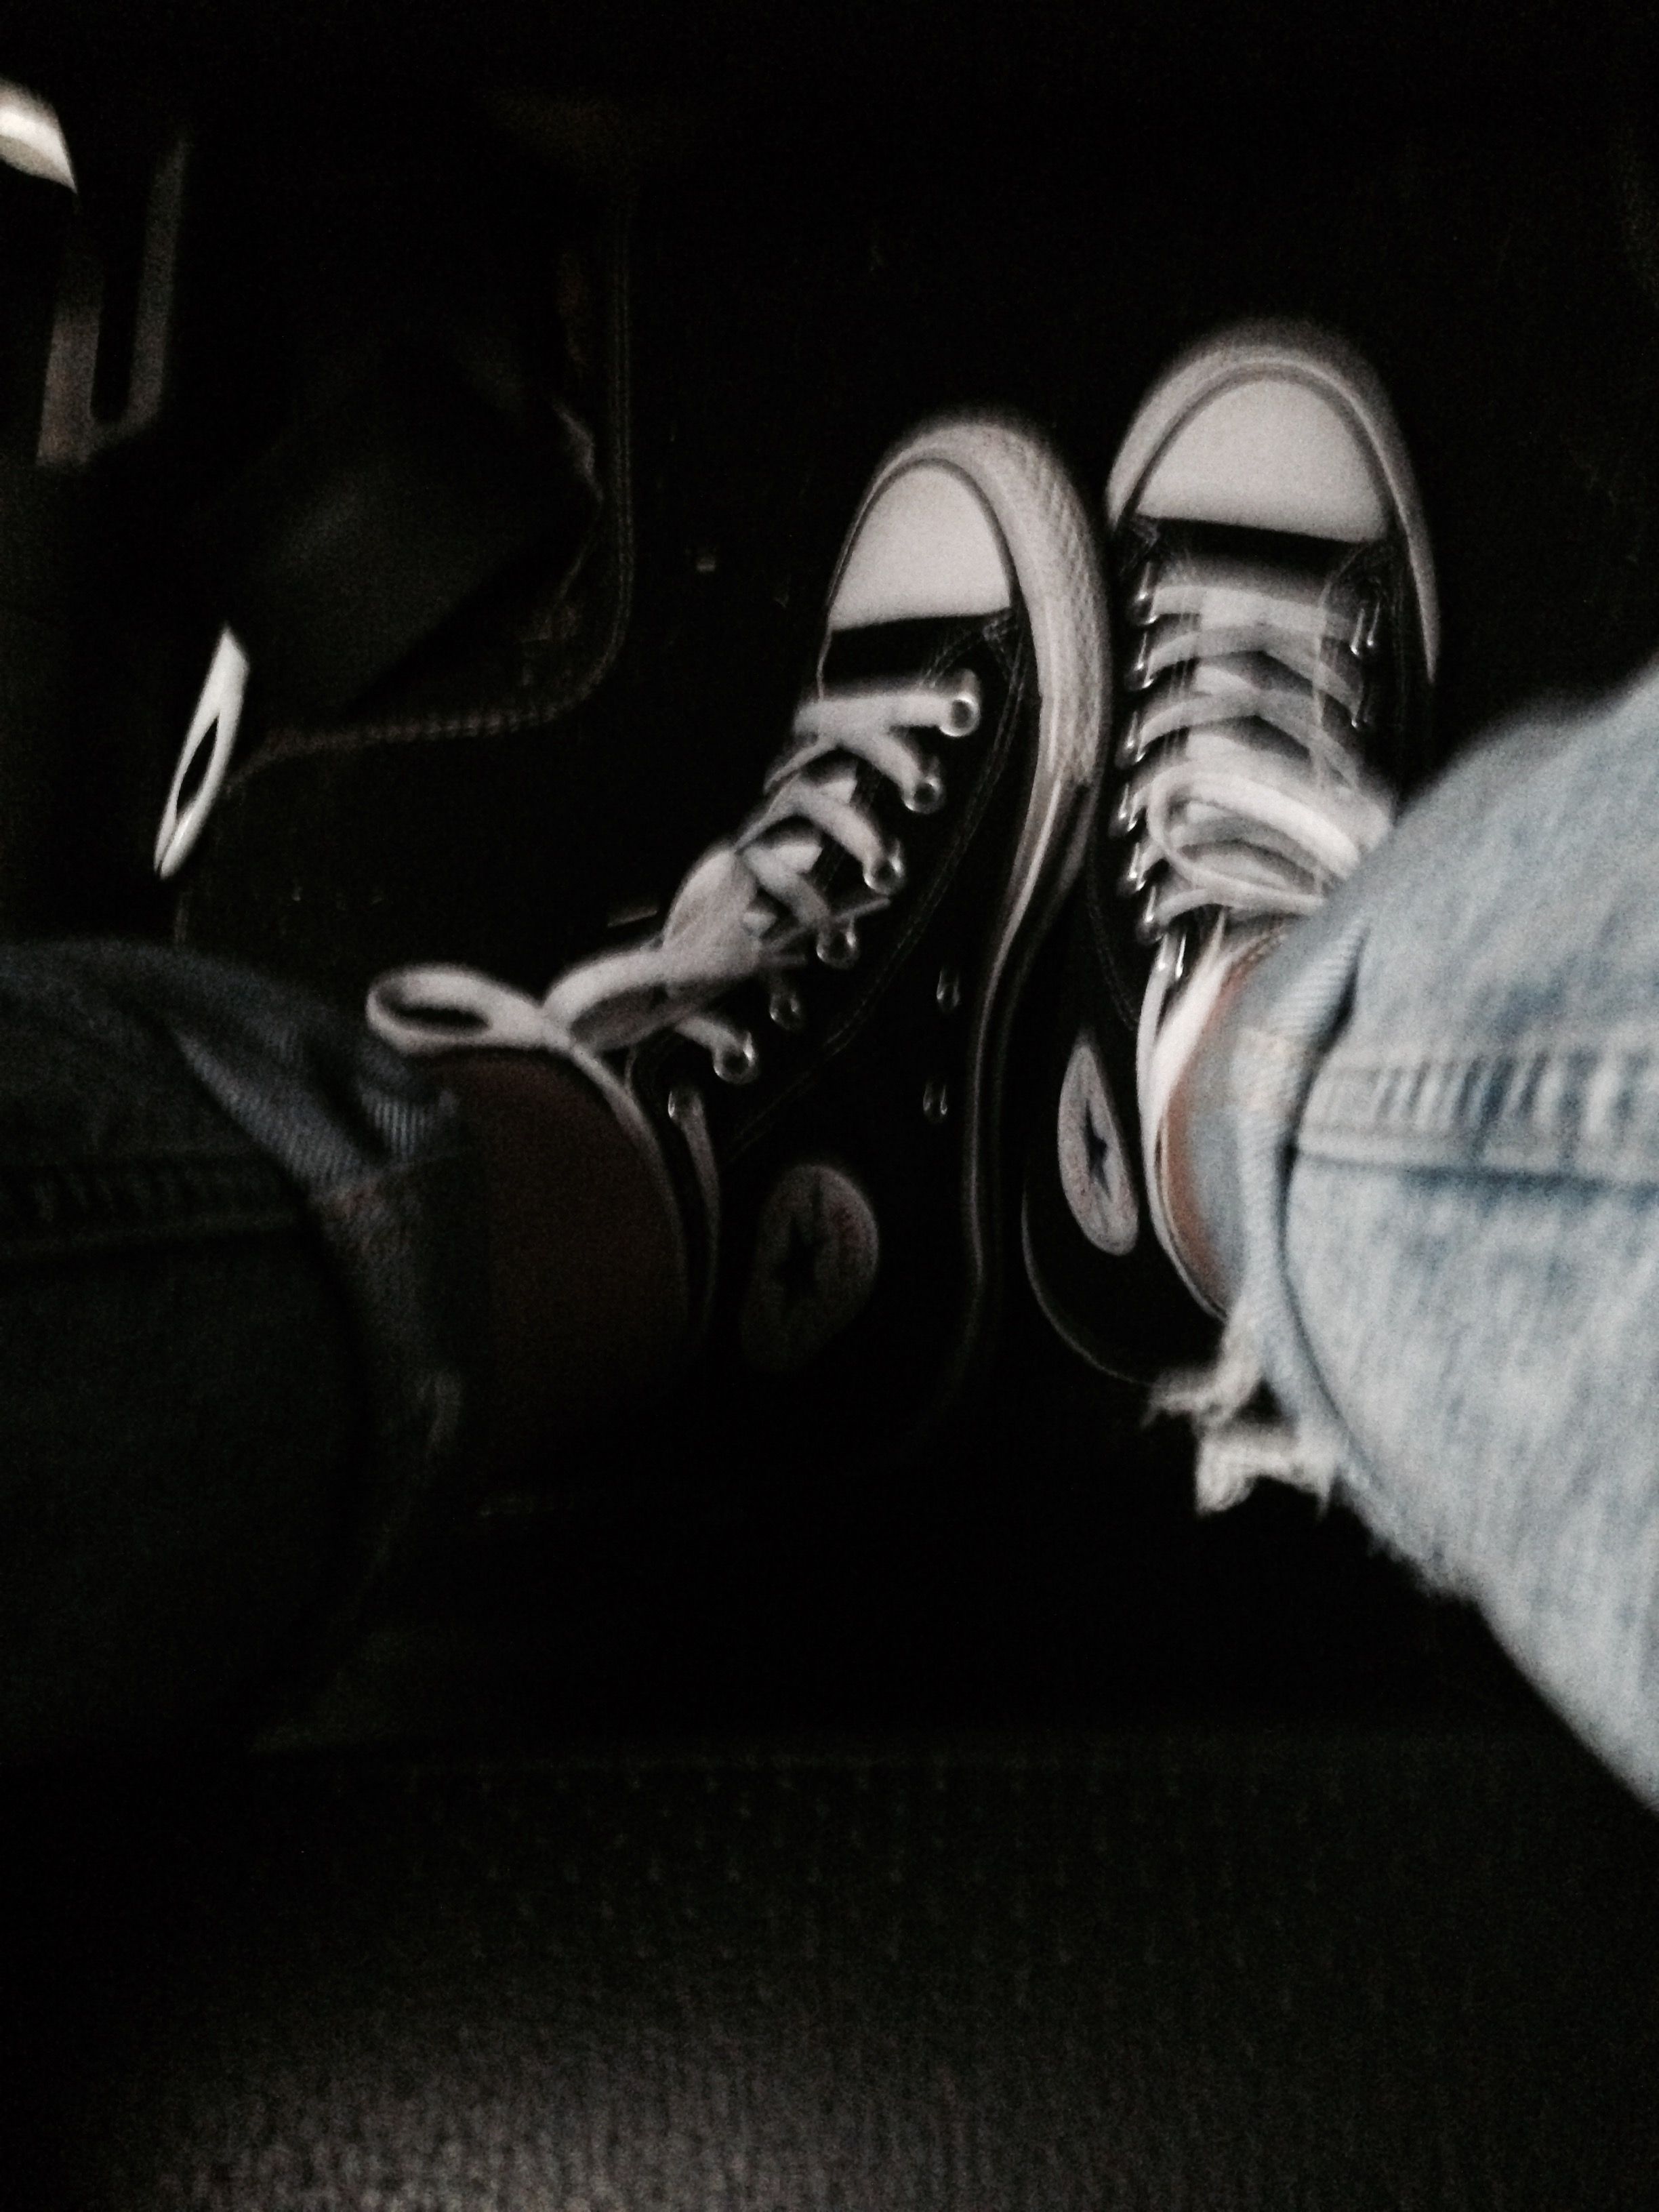 A pair of feet wearing converse sneakers are shown in a dark room. - Converse